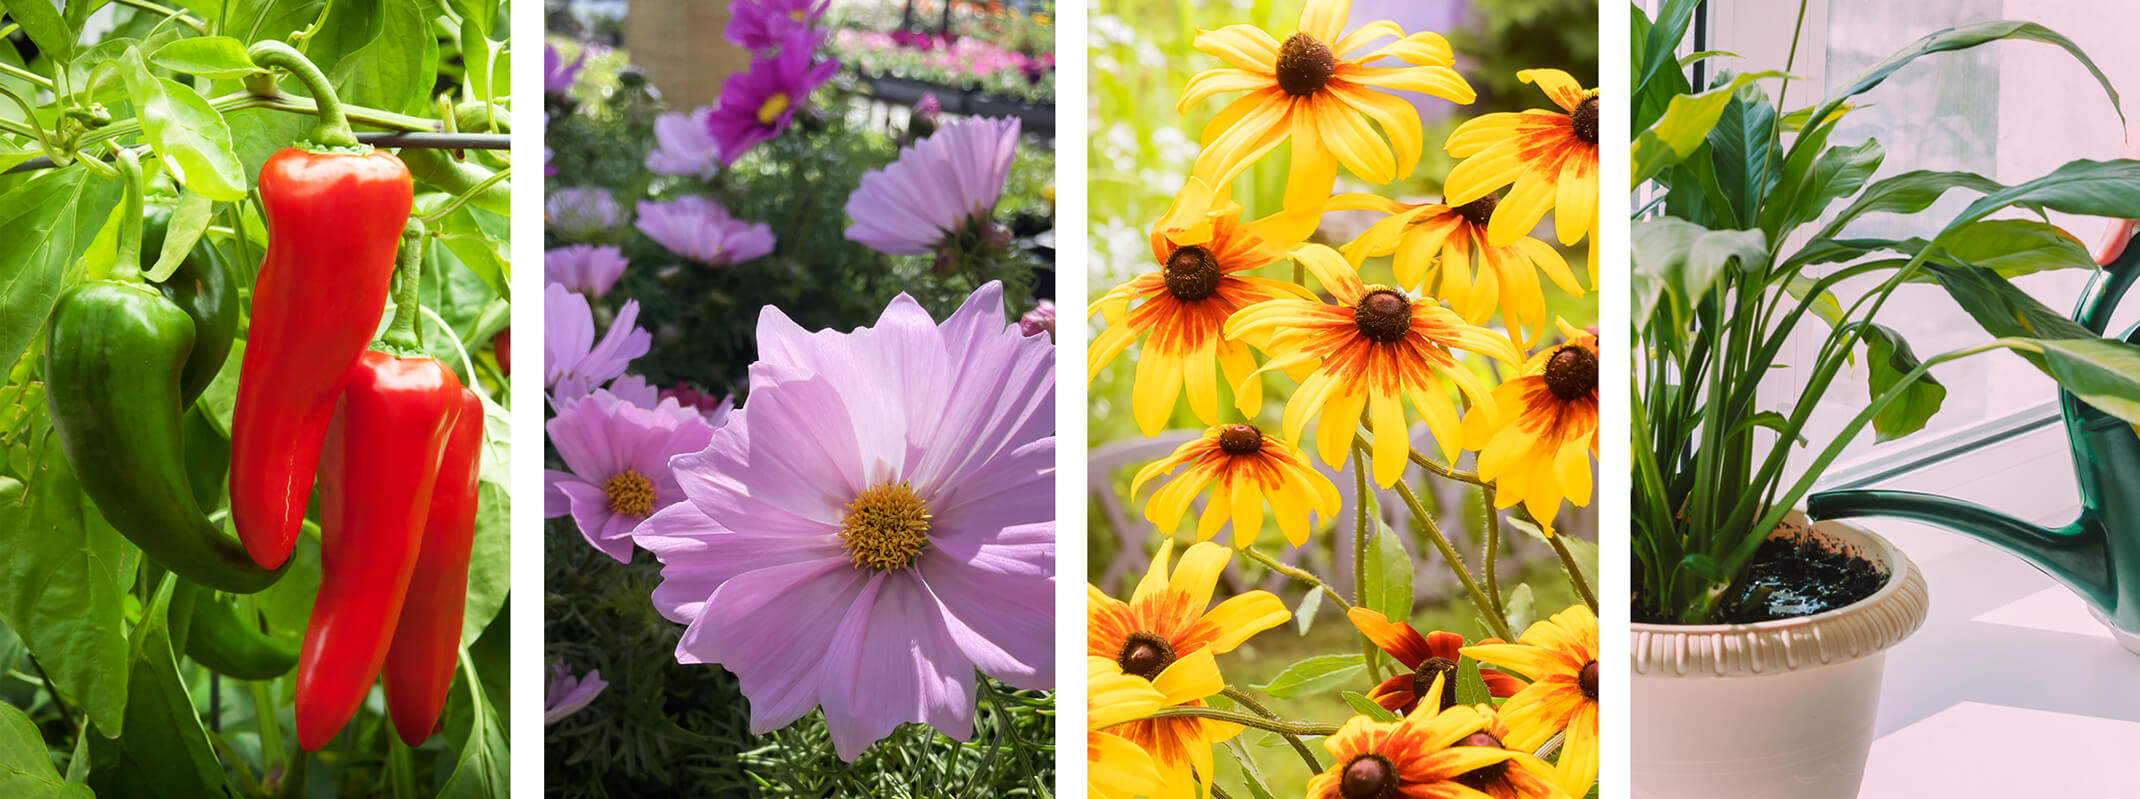 april gardening tips calendar images pepper plant, cosmos flowers, rudebeckia and a person watering their houseplant